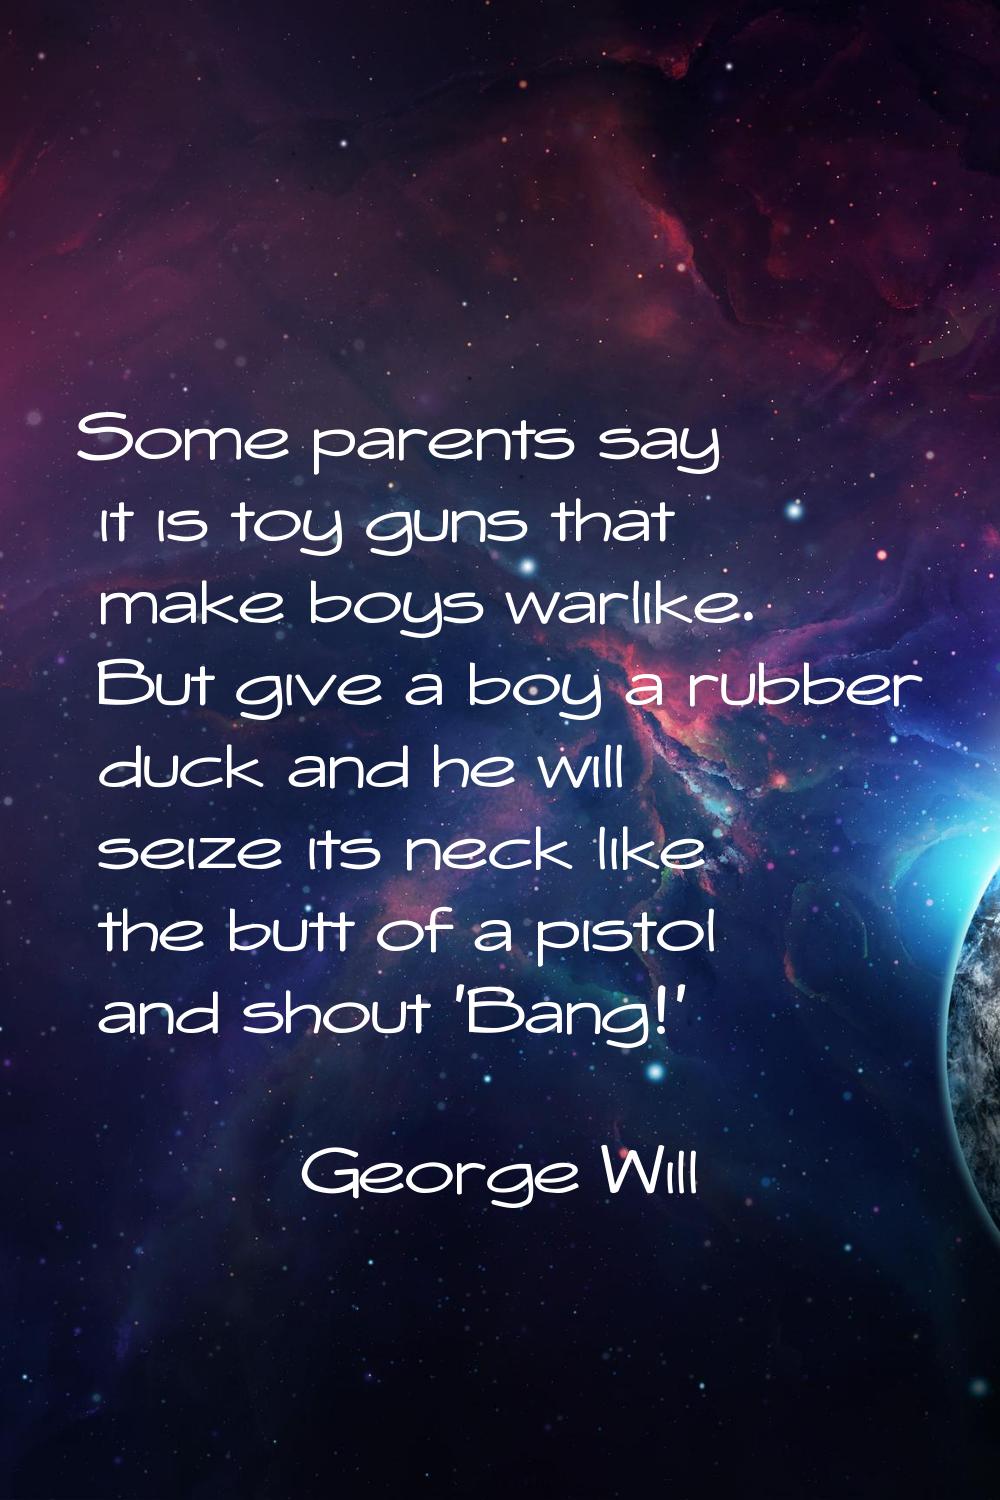 Some parents say it is toy guns that make boys warlike. But give a boy a rubber duck and he will se